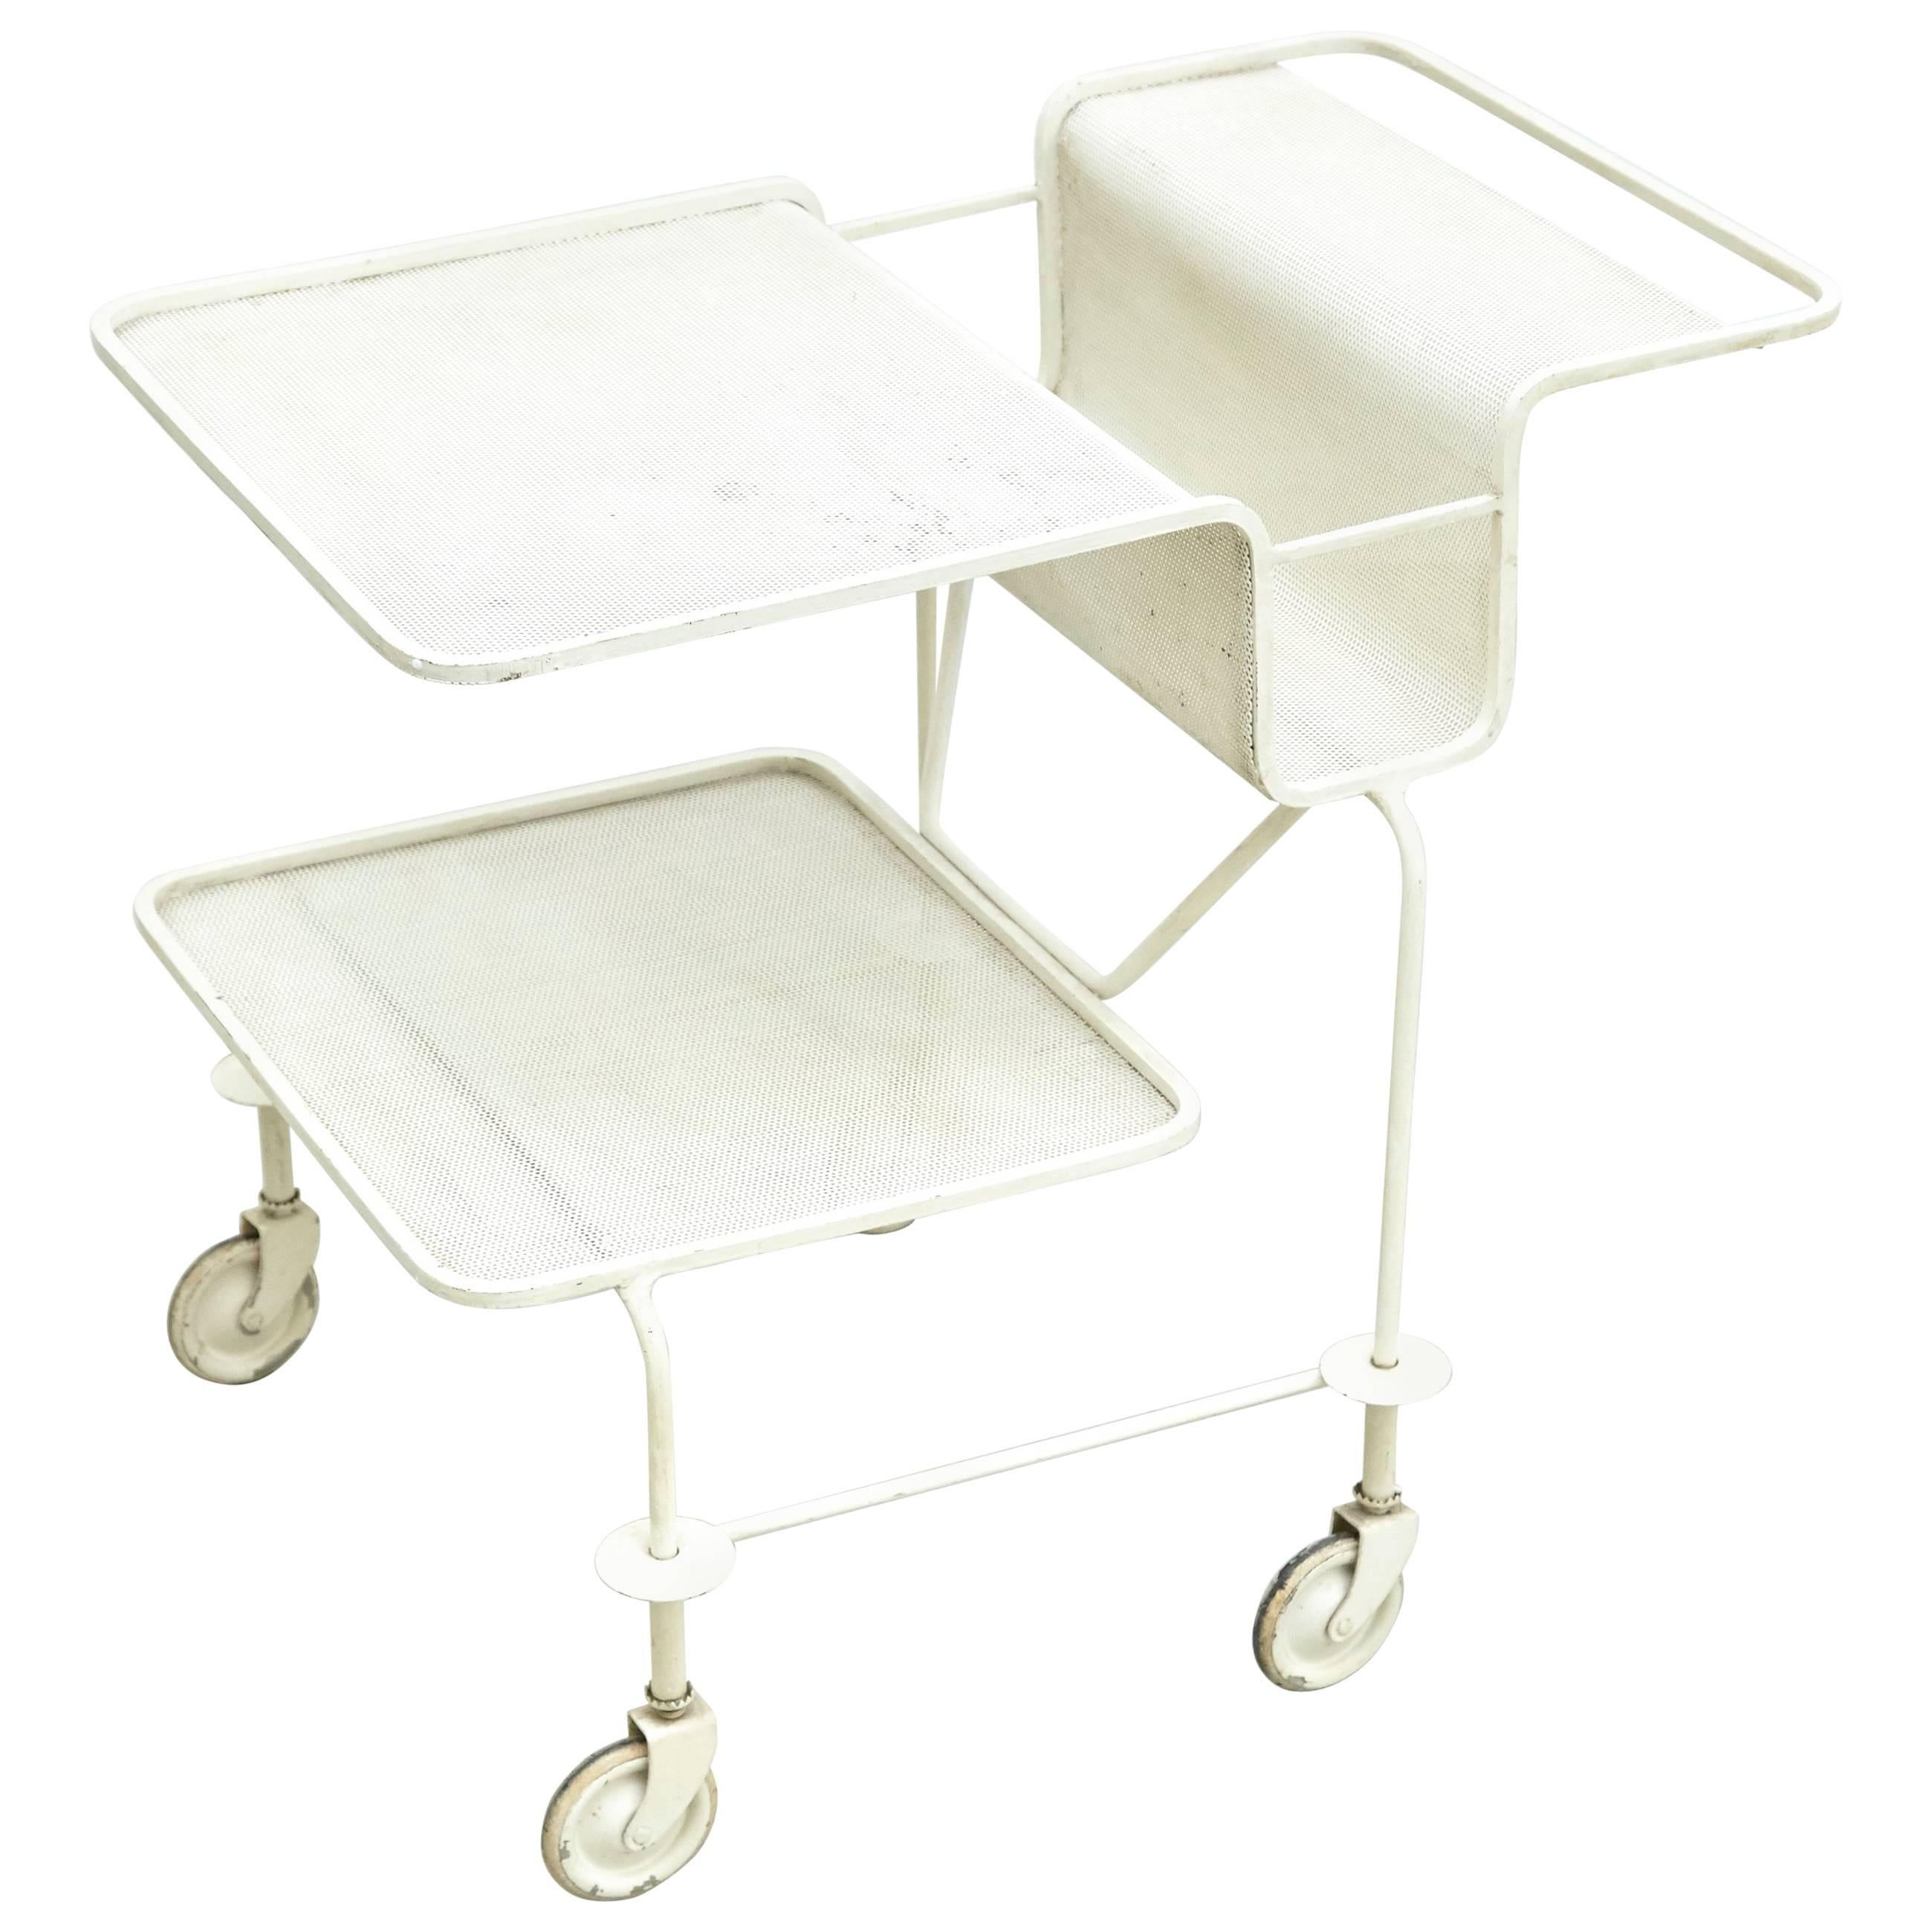 Mathieu Mategot Mid Century Modern White Lacquered French Trolley, circa 1950